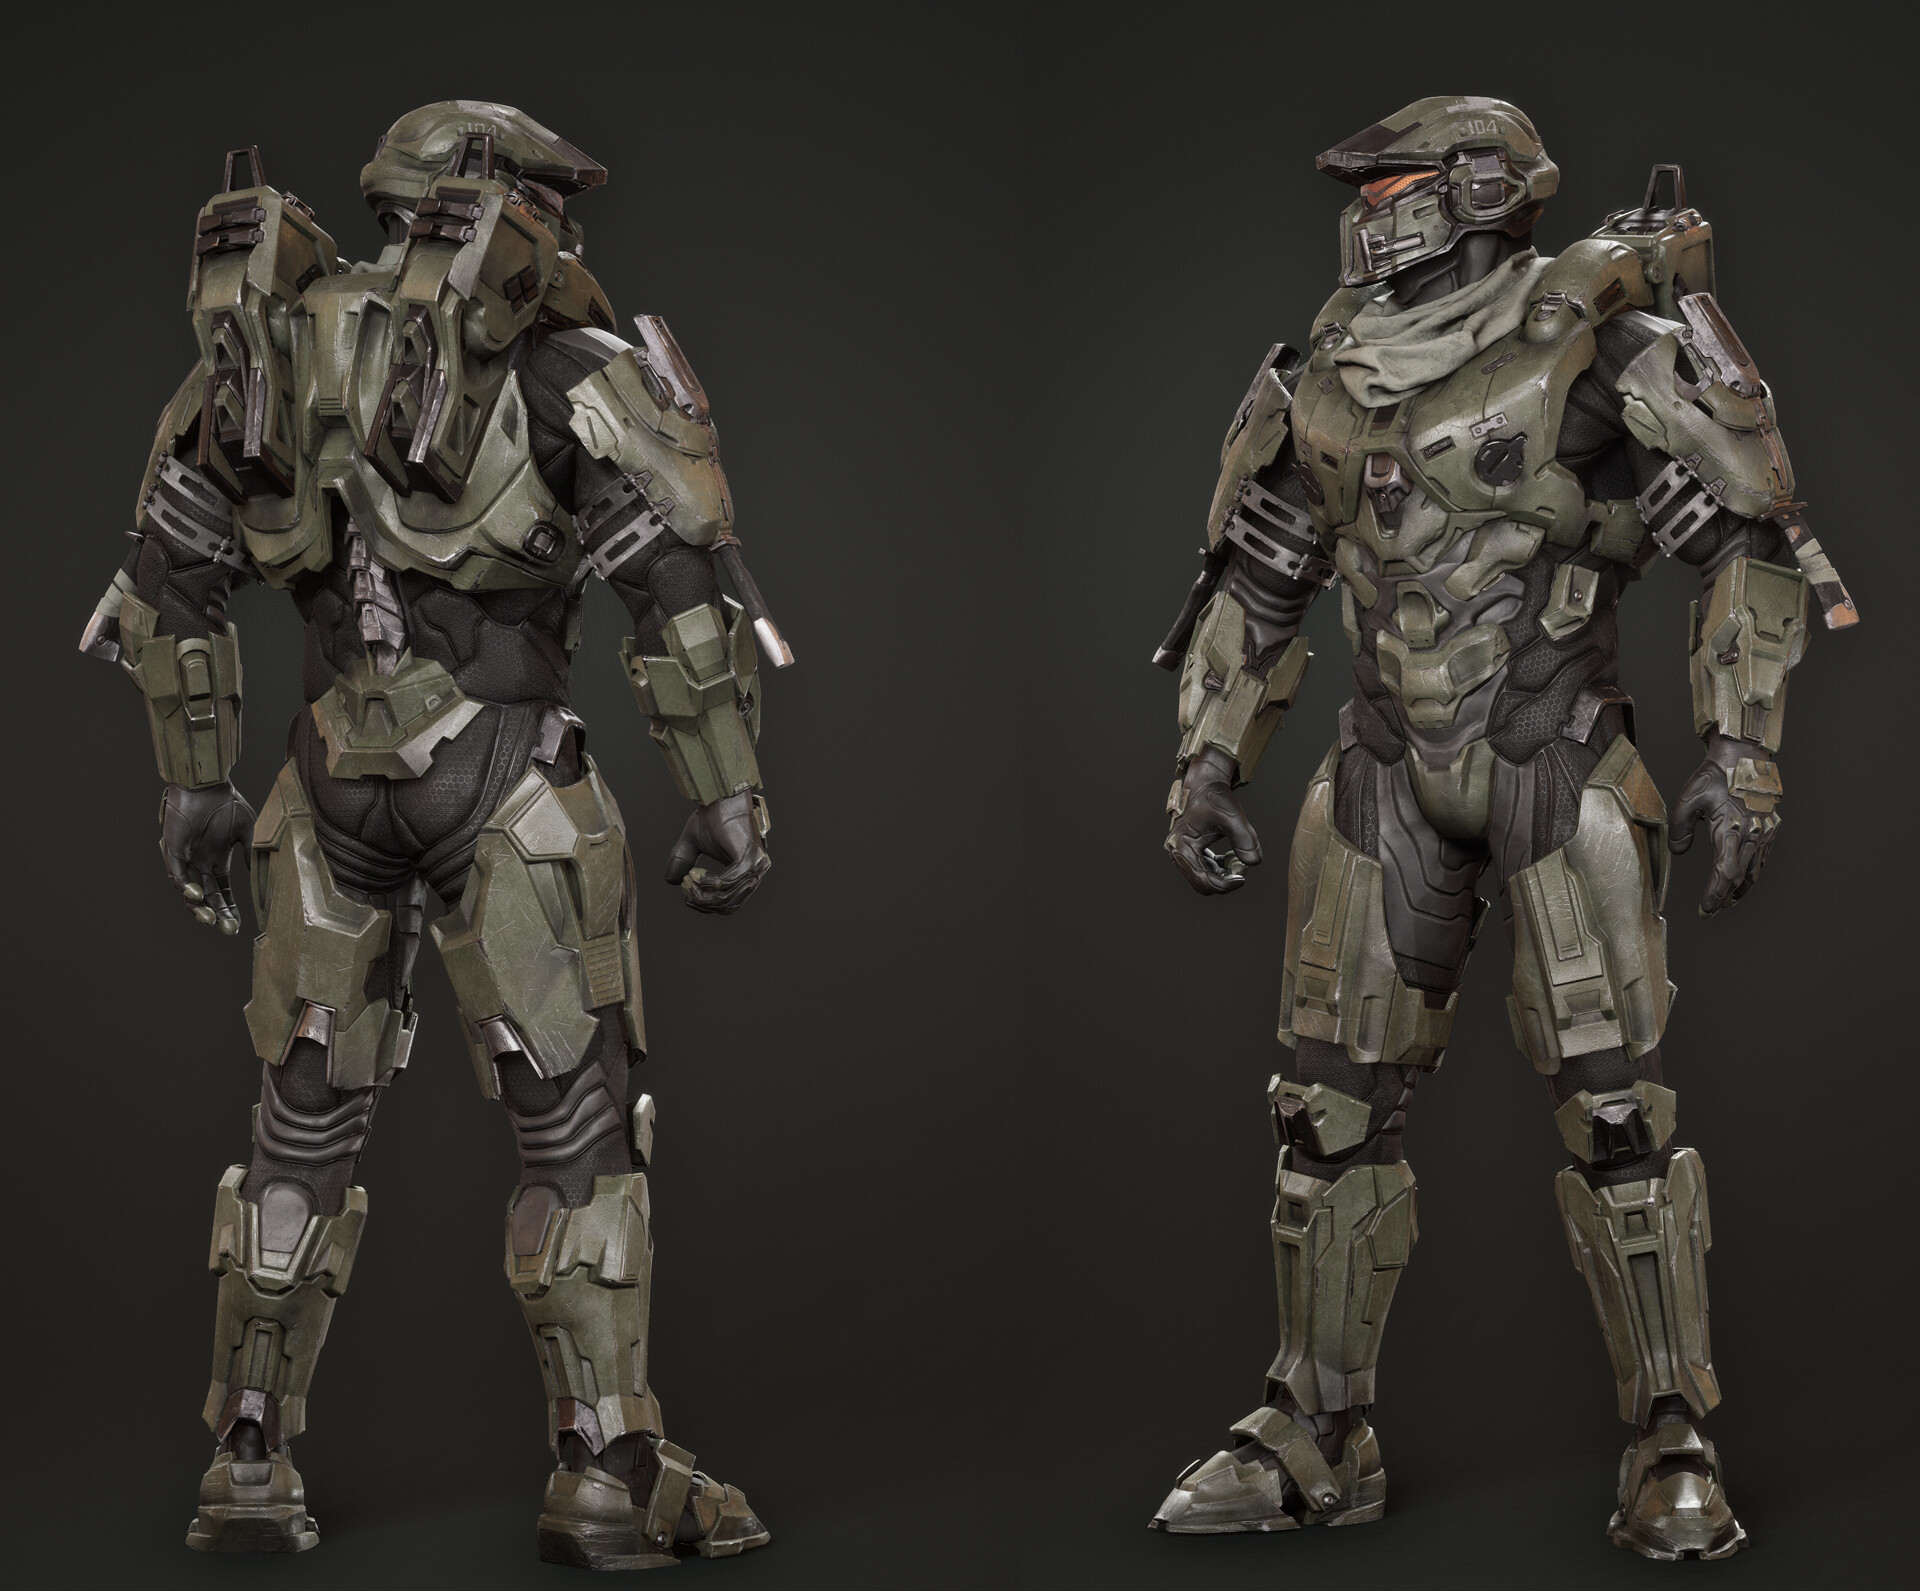 ArtStation - Fred- 104 early concept for Halo 5